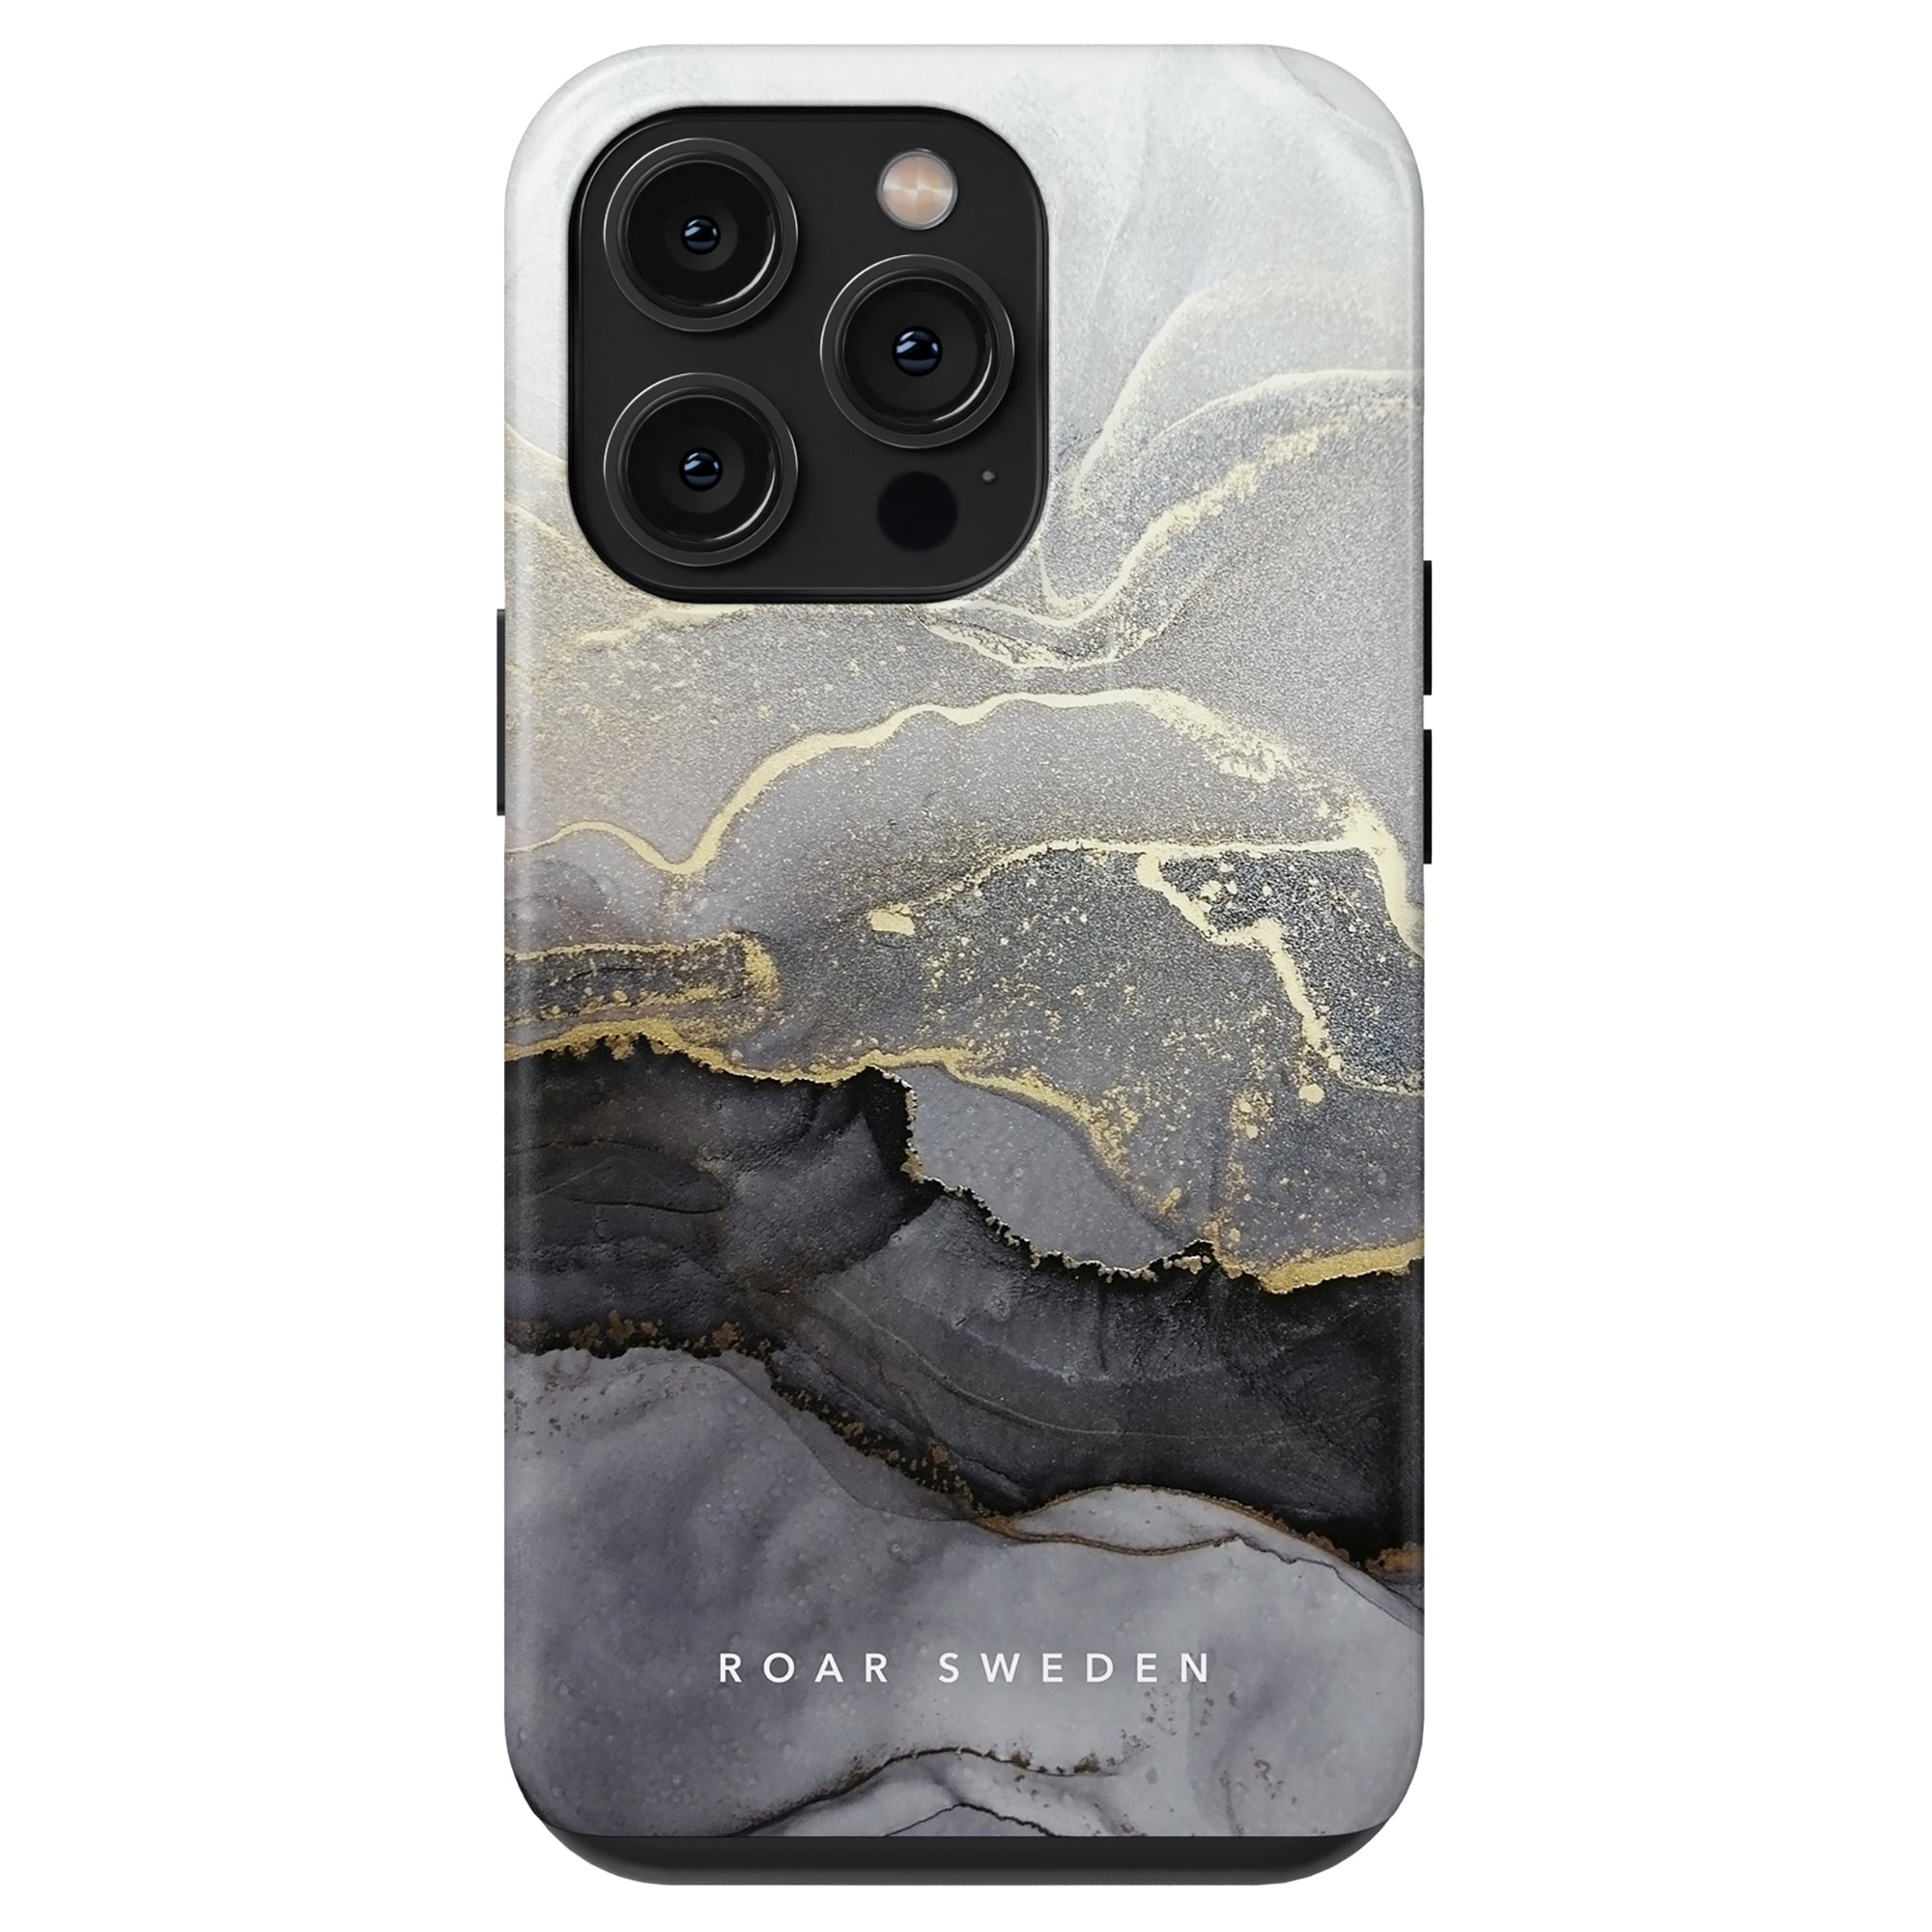 A black and gold marble case from Roar Swedens Sparkle - Tough Case collection for the iPhone 11 Pro.